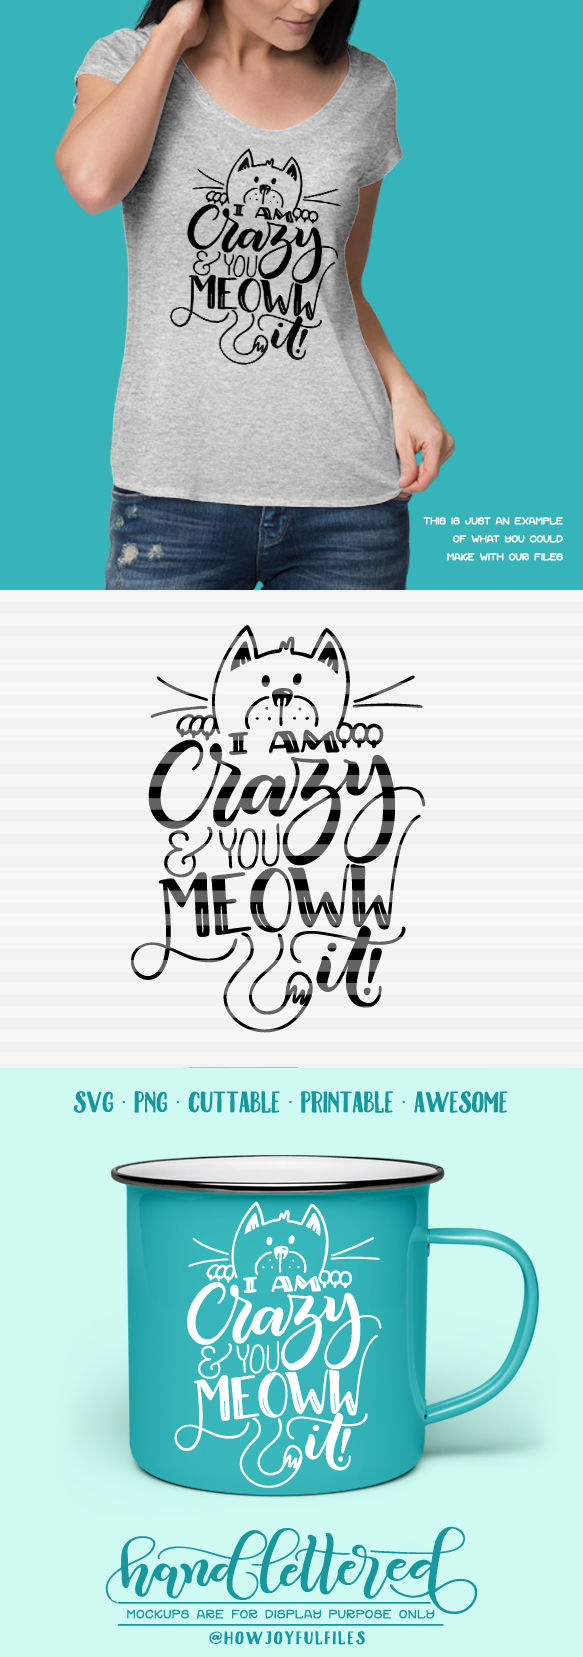 I Am Crazy And You Meoww It Crazy Cat Lady Hand Lettered Cut File By Howjoyful Files Thehungryjpeg Com